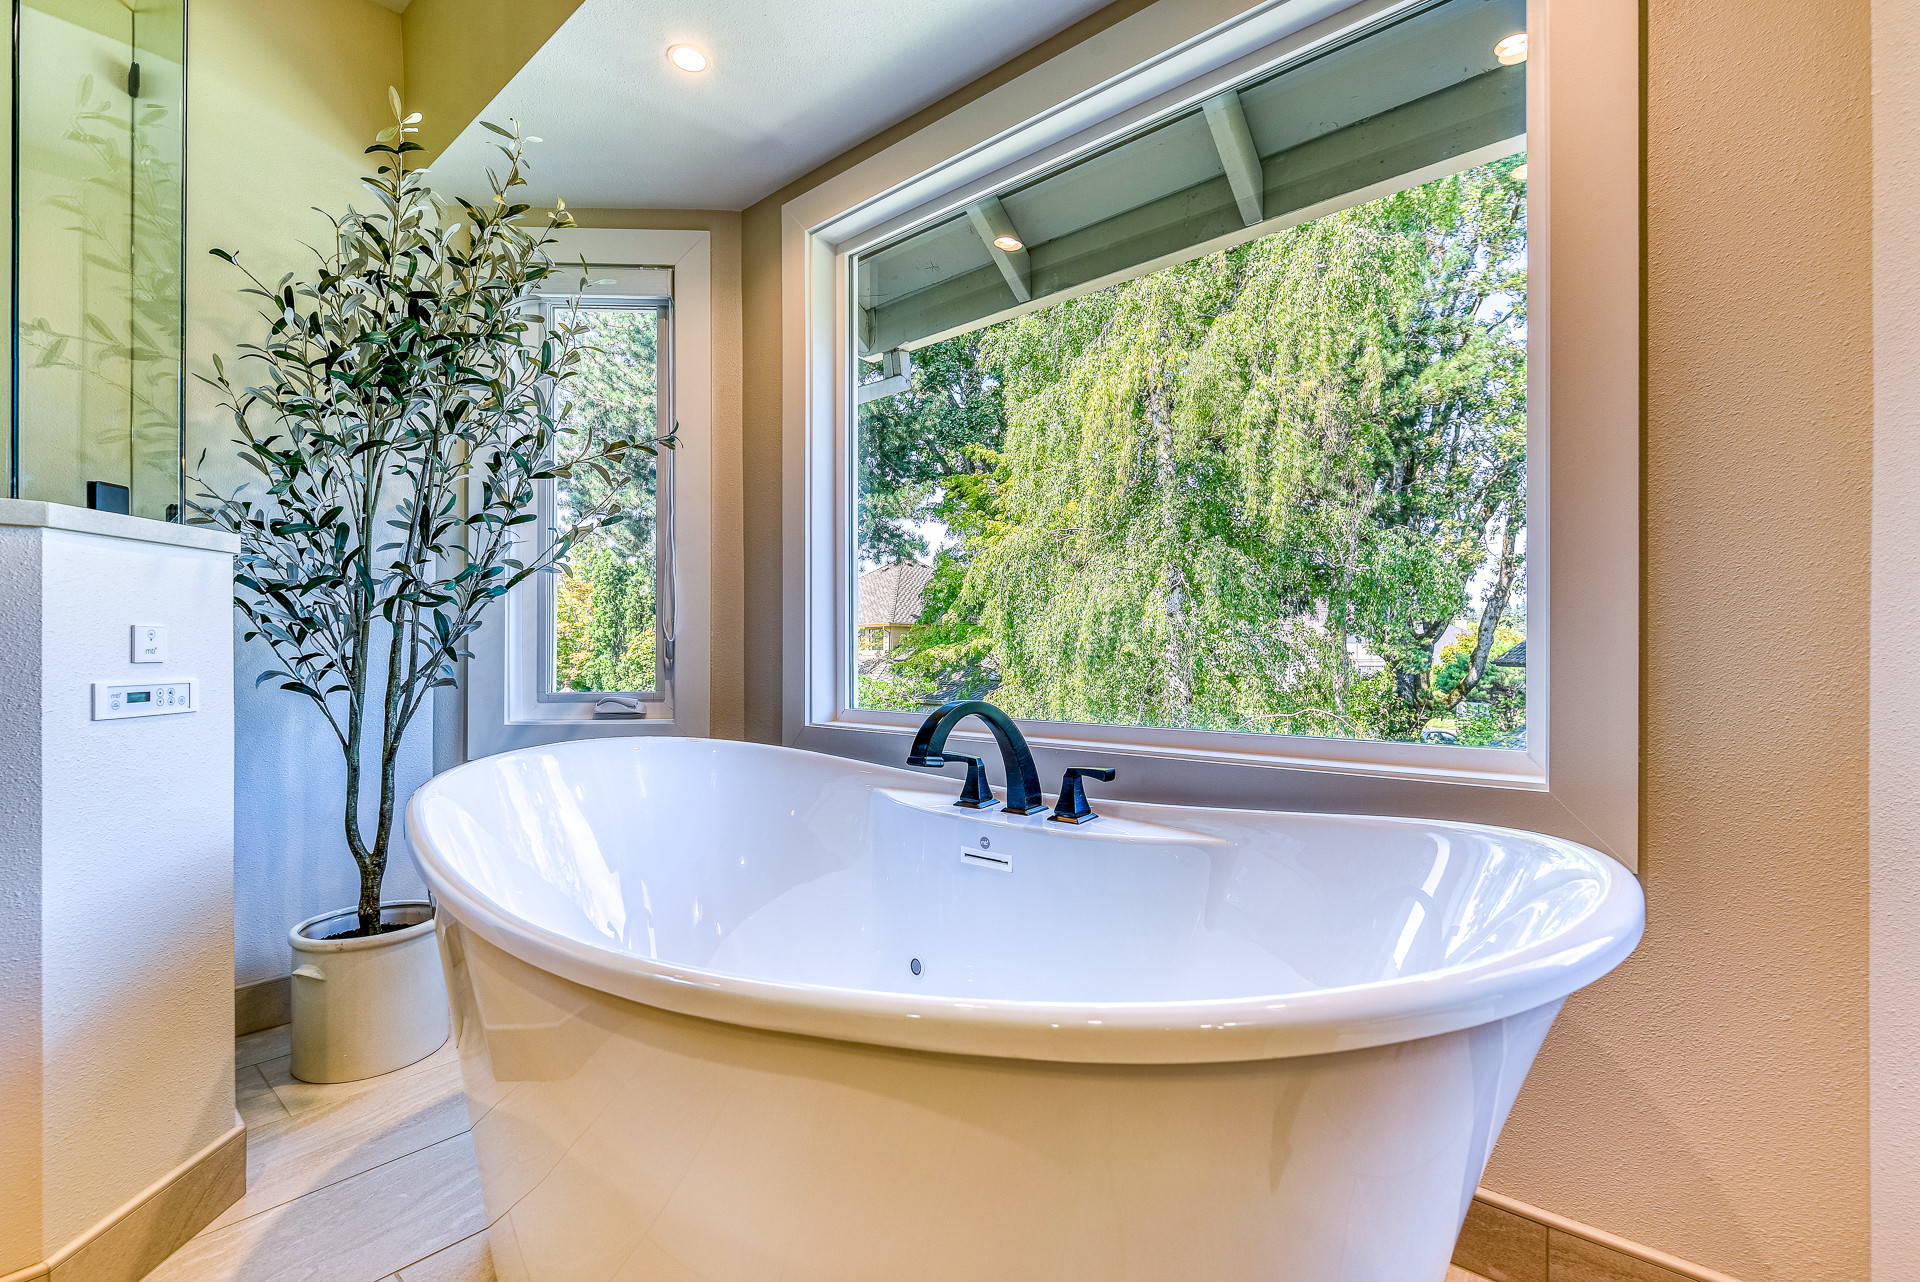 This 90's beauty had an odd layout with a built-in tub deck.  It had a closed off layout and was dated with striped wallpaper, tiled countertops and gold fixtures. We removed the tub deck and installe